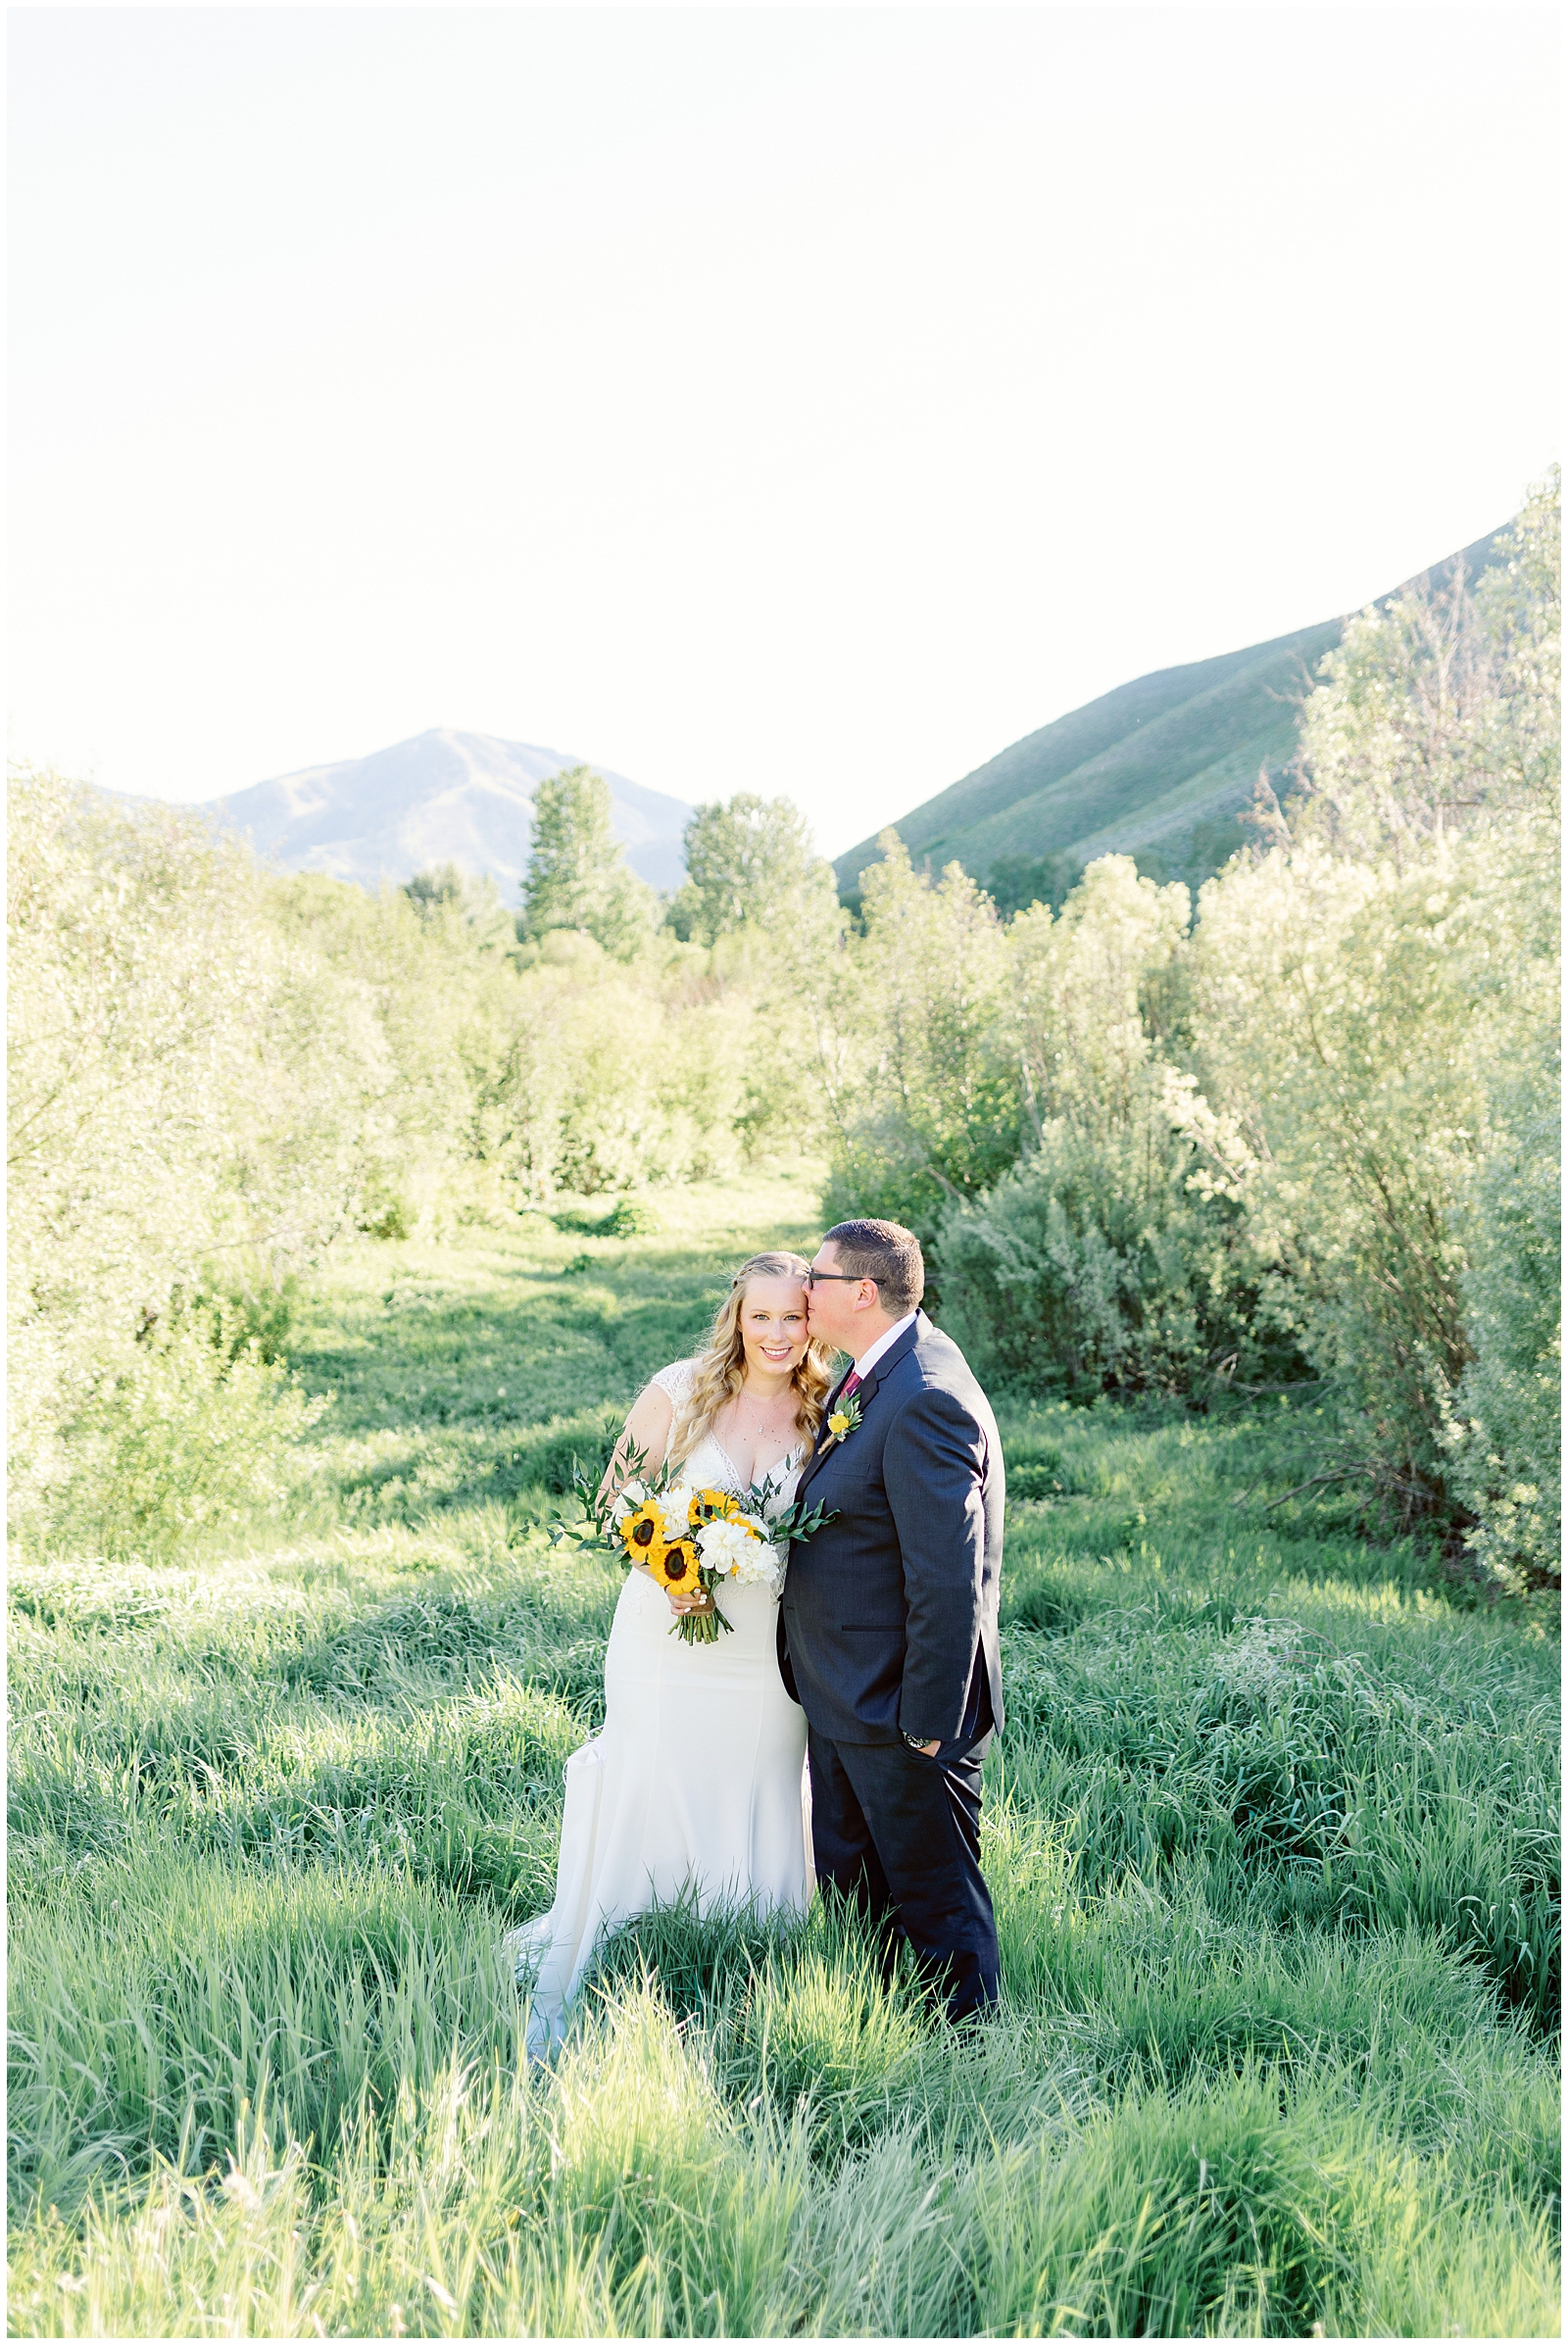 Husband and Wife Golden Hour Portraits at Trail Creek Cabin Wedding in Sun Valley, Idaho